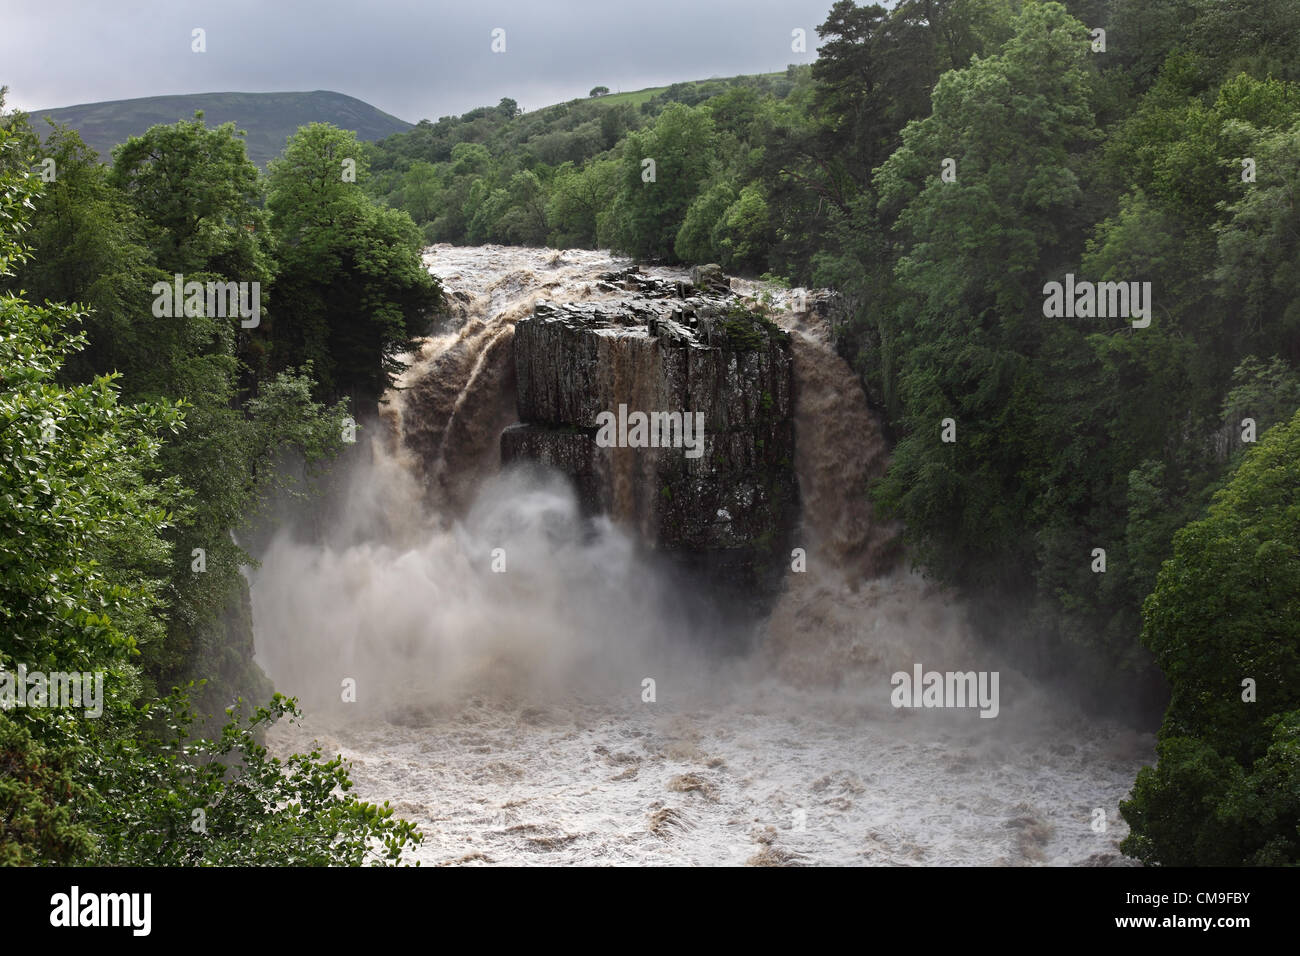 High Force Waterfall, River Tees, Teesdale, UK. 28 June, 2012. High Force Waterfall on the River Tees After Thunderstorms and Heavy Rain Caused Flash Flooding Throughout North East England. Stock Photo